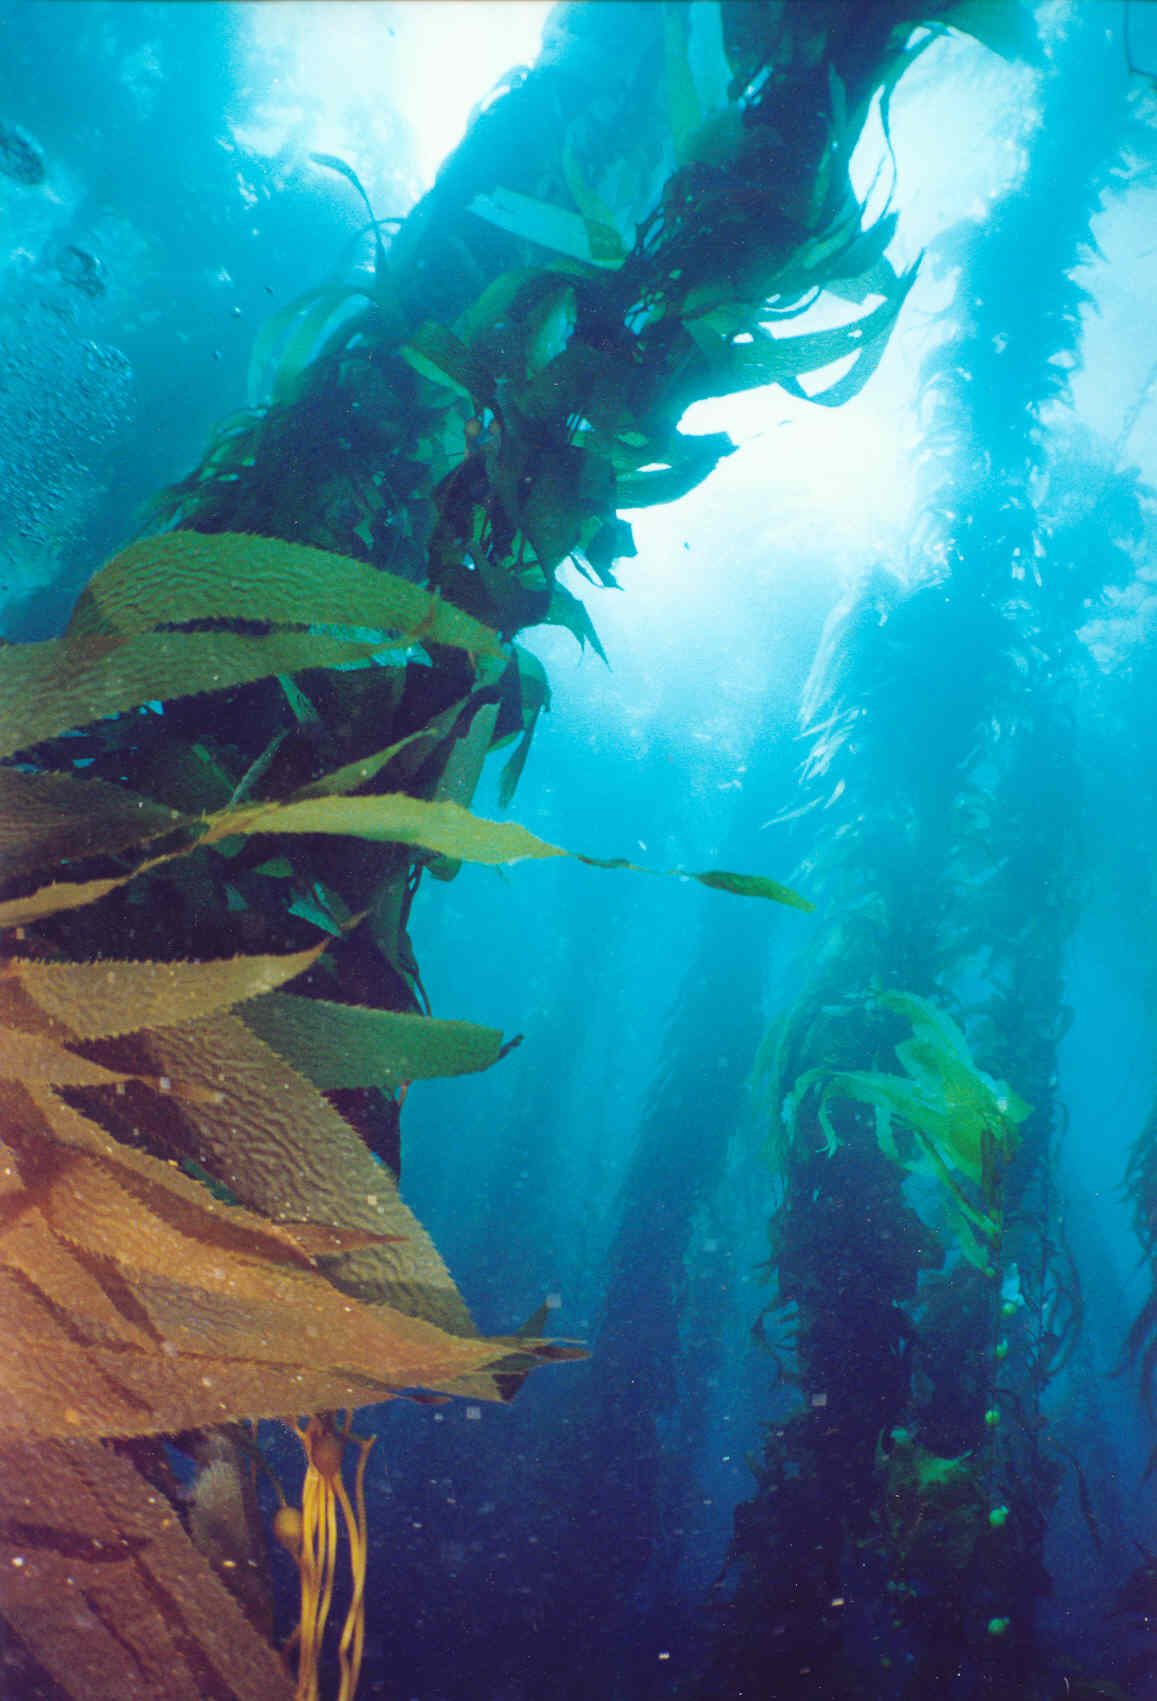 In a Kelp Forest